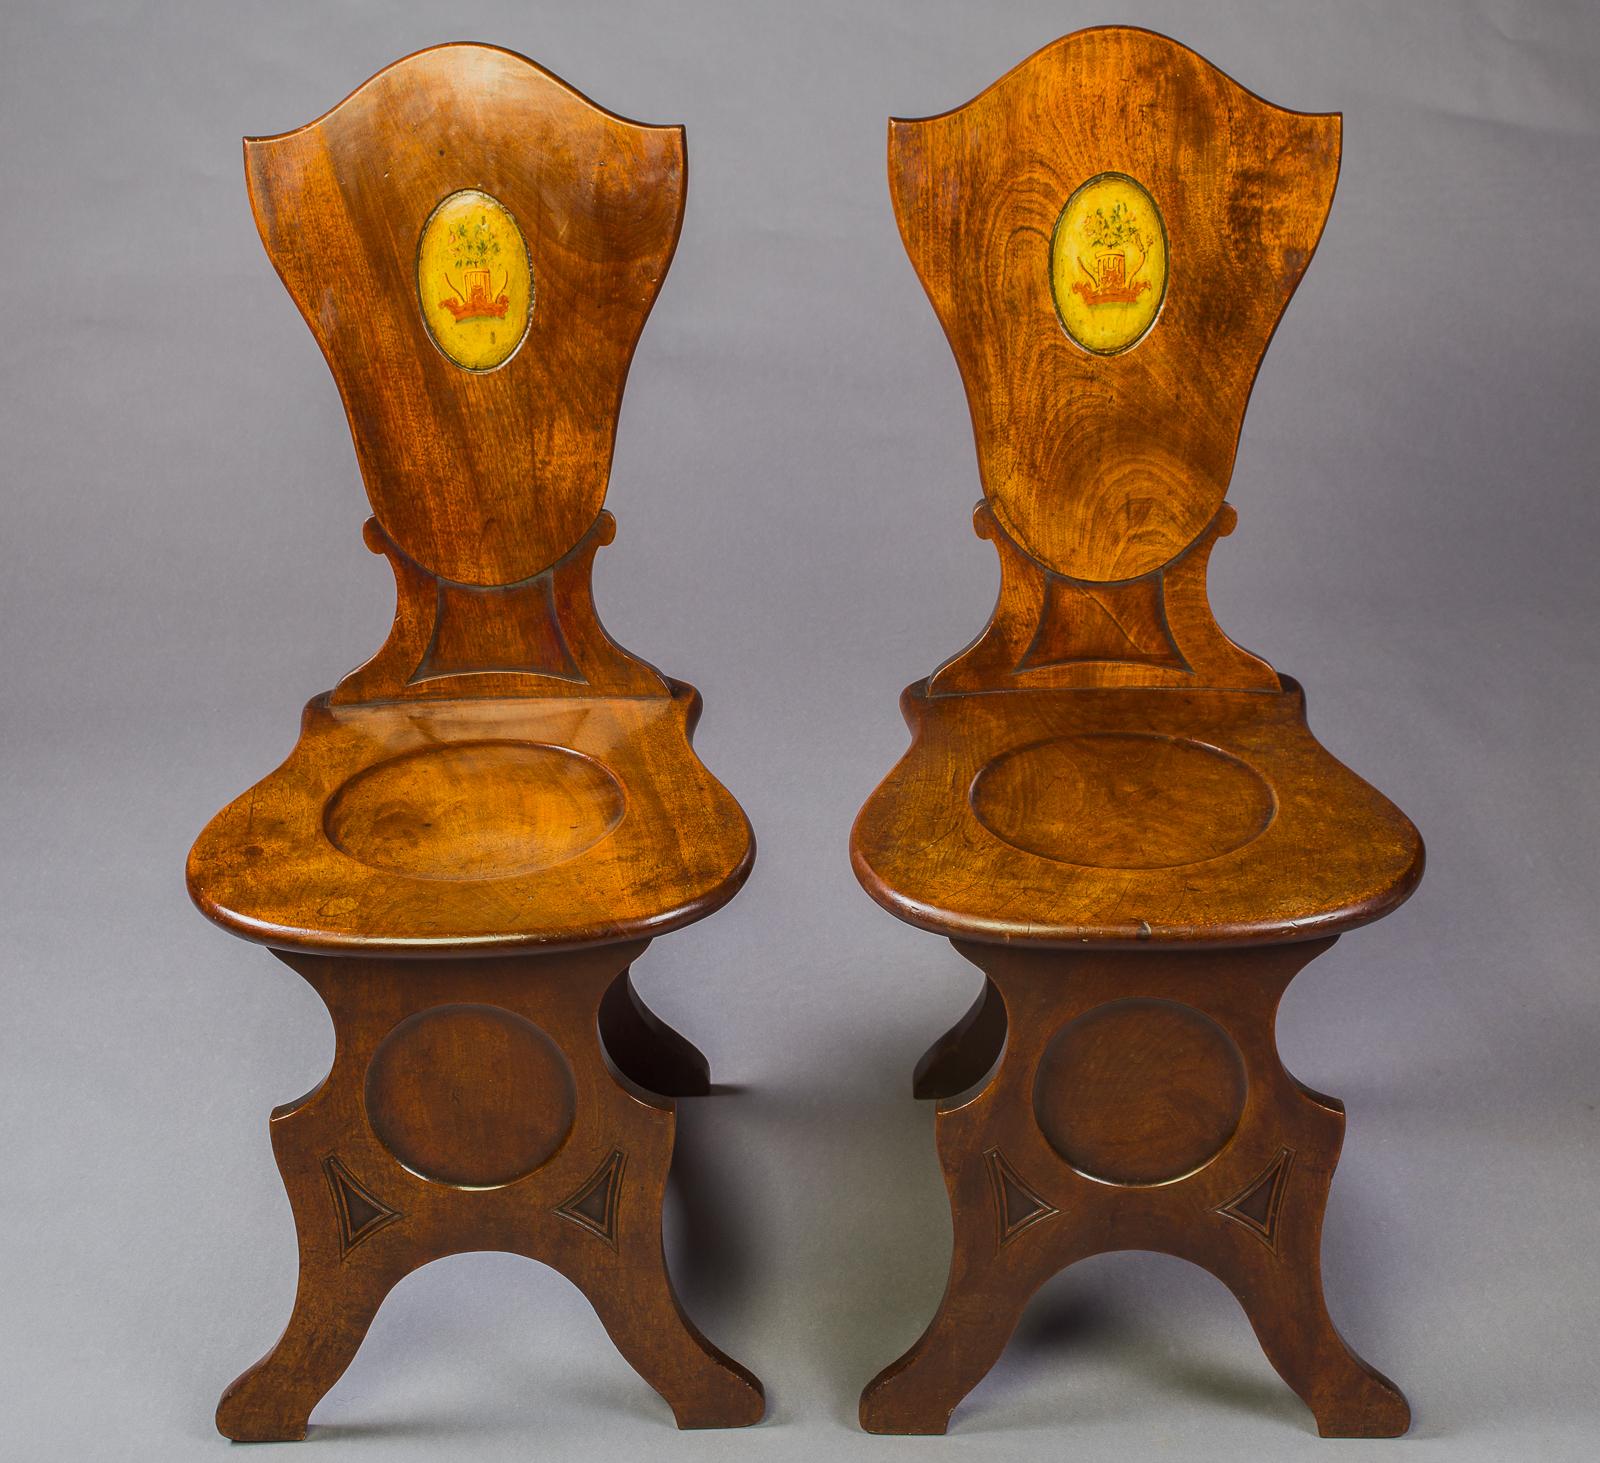 A pair of George III Figured Mahogany hall chairs The shaped solid back with a central oval painted, coat of arms, above an round panel seat,
the colour and patina of these chairs is exceptional.

English, Circa 1750
Measures: Height: 38inches,